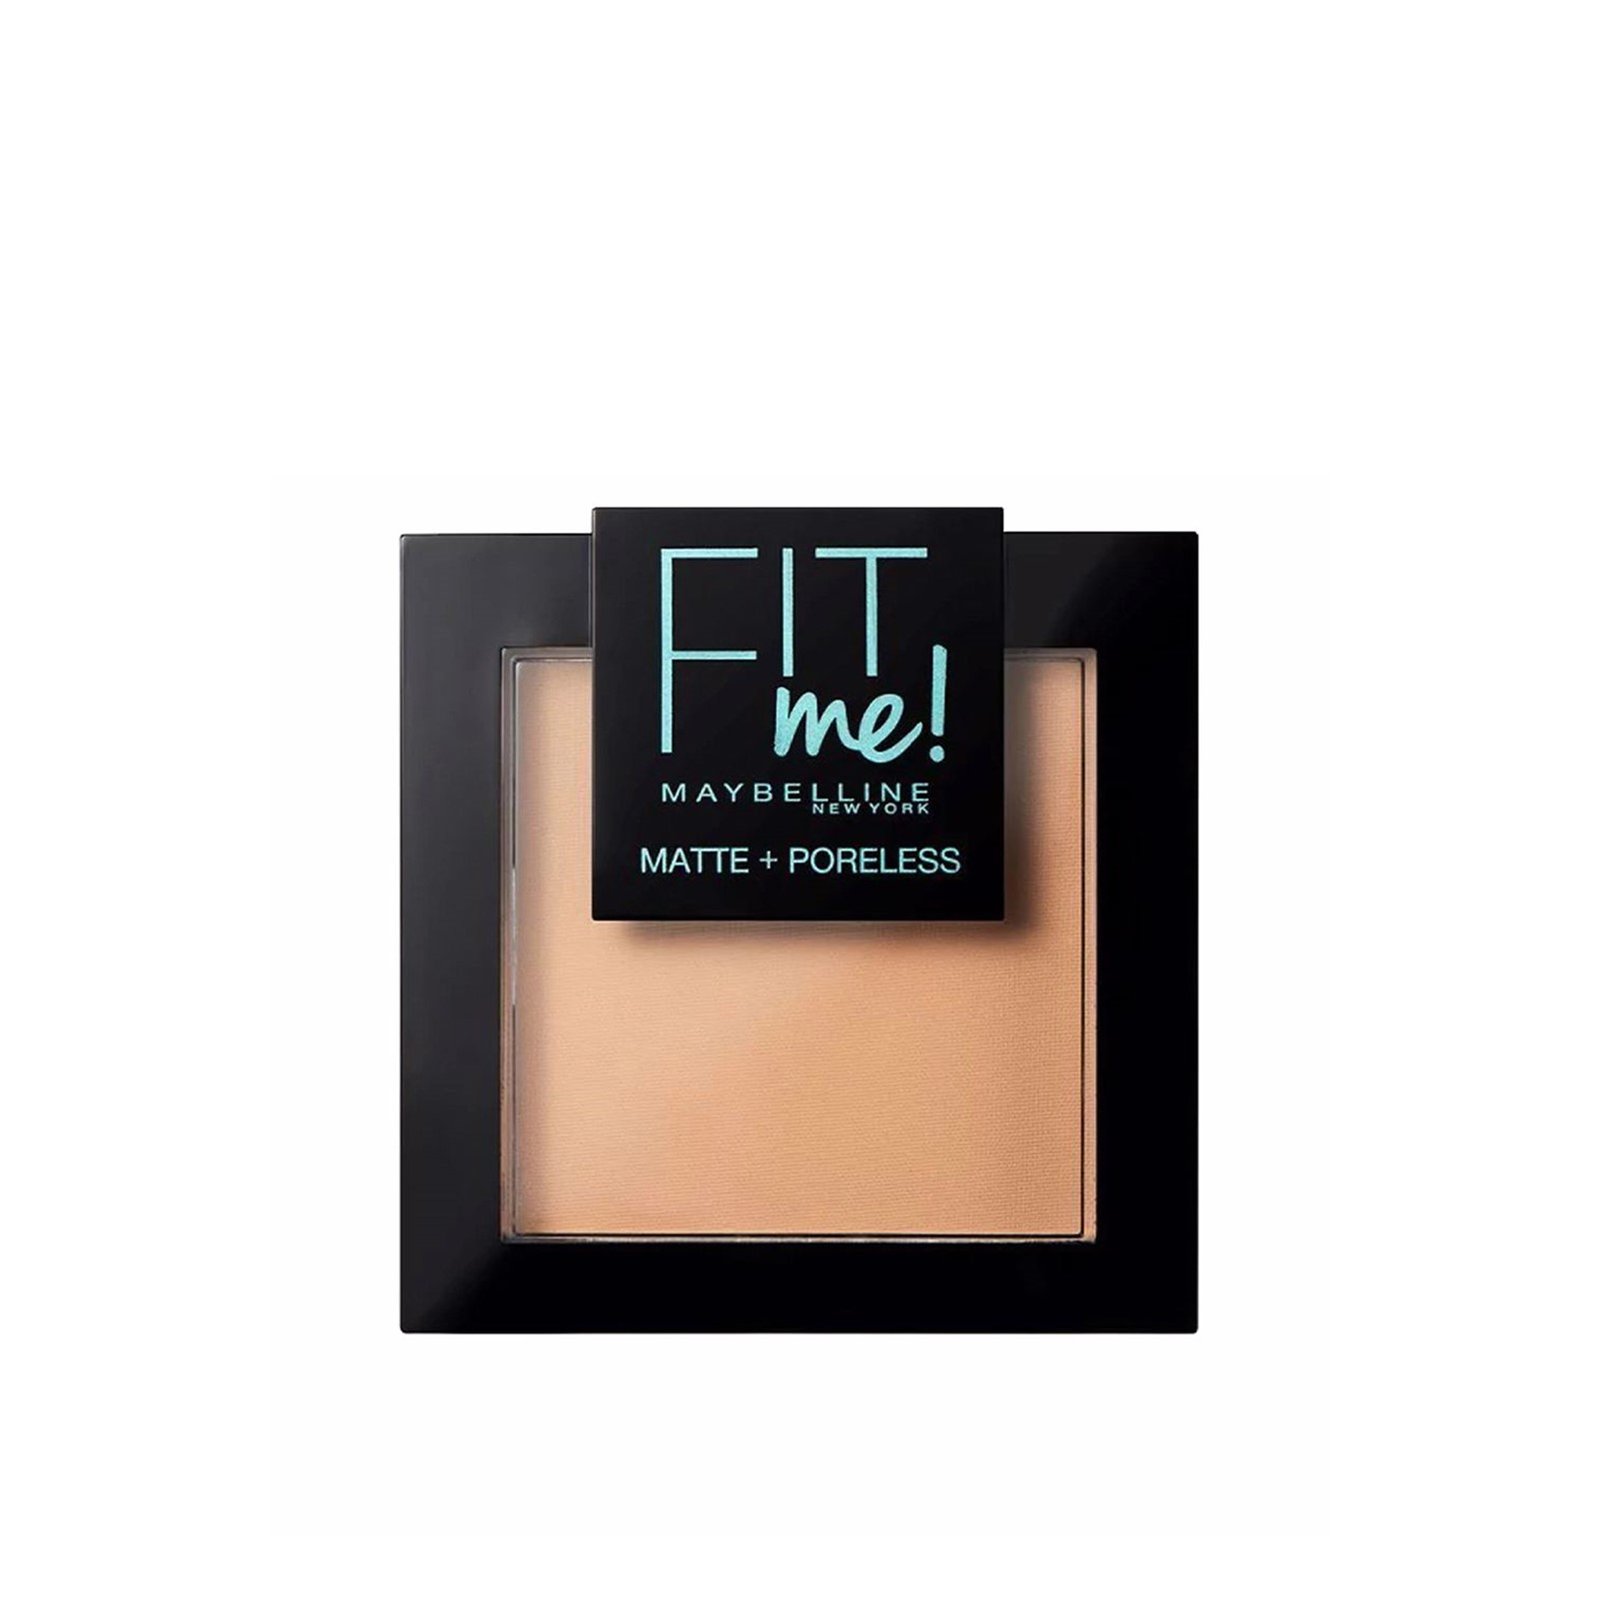 Maybelline New York Liquid Foundation Natural Beige & Compact Powder 220  Natural Beige Matte finish for all skin type, 8gm